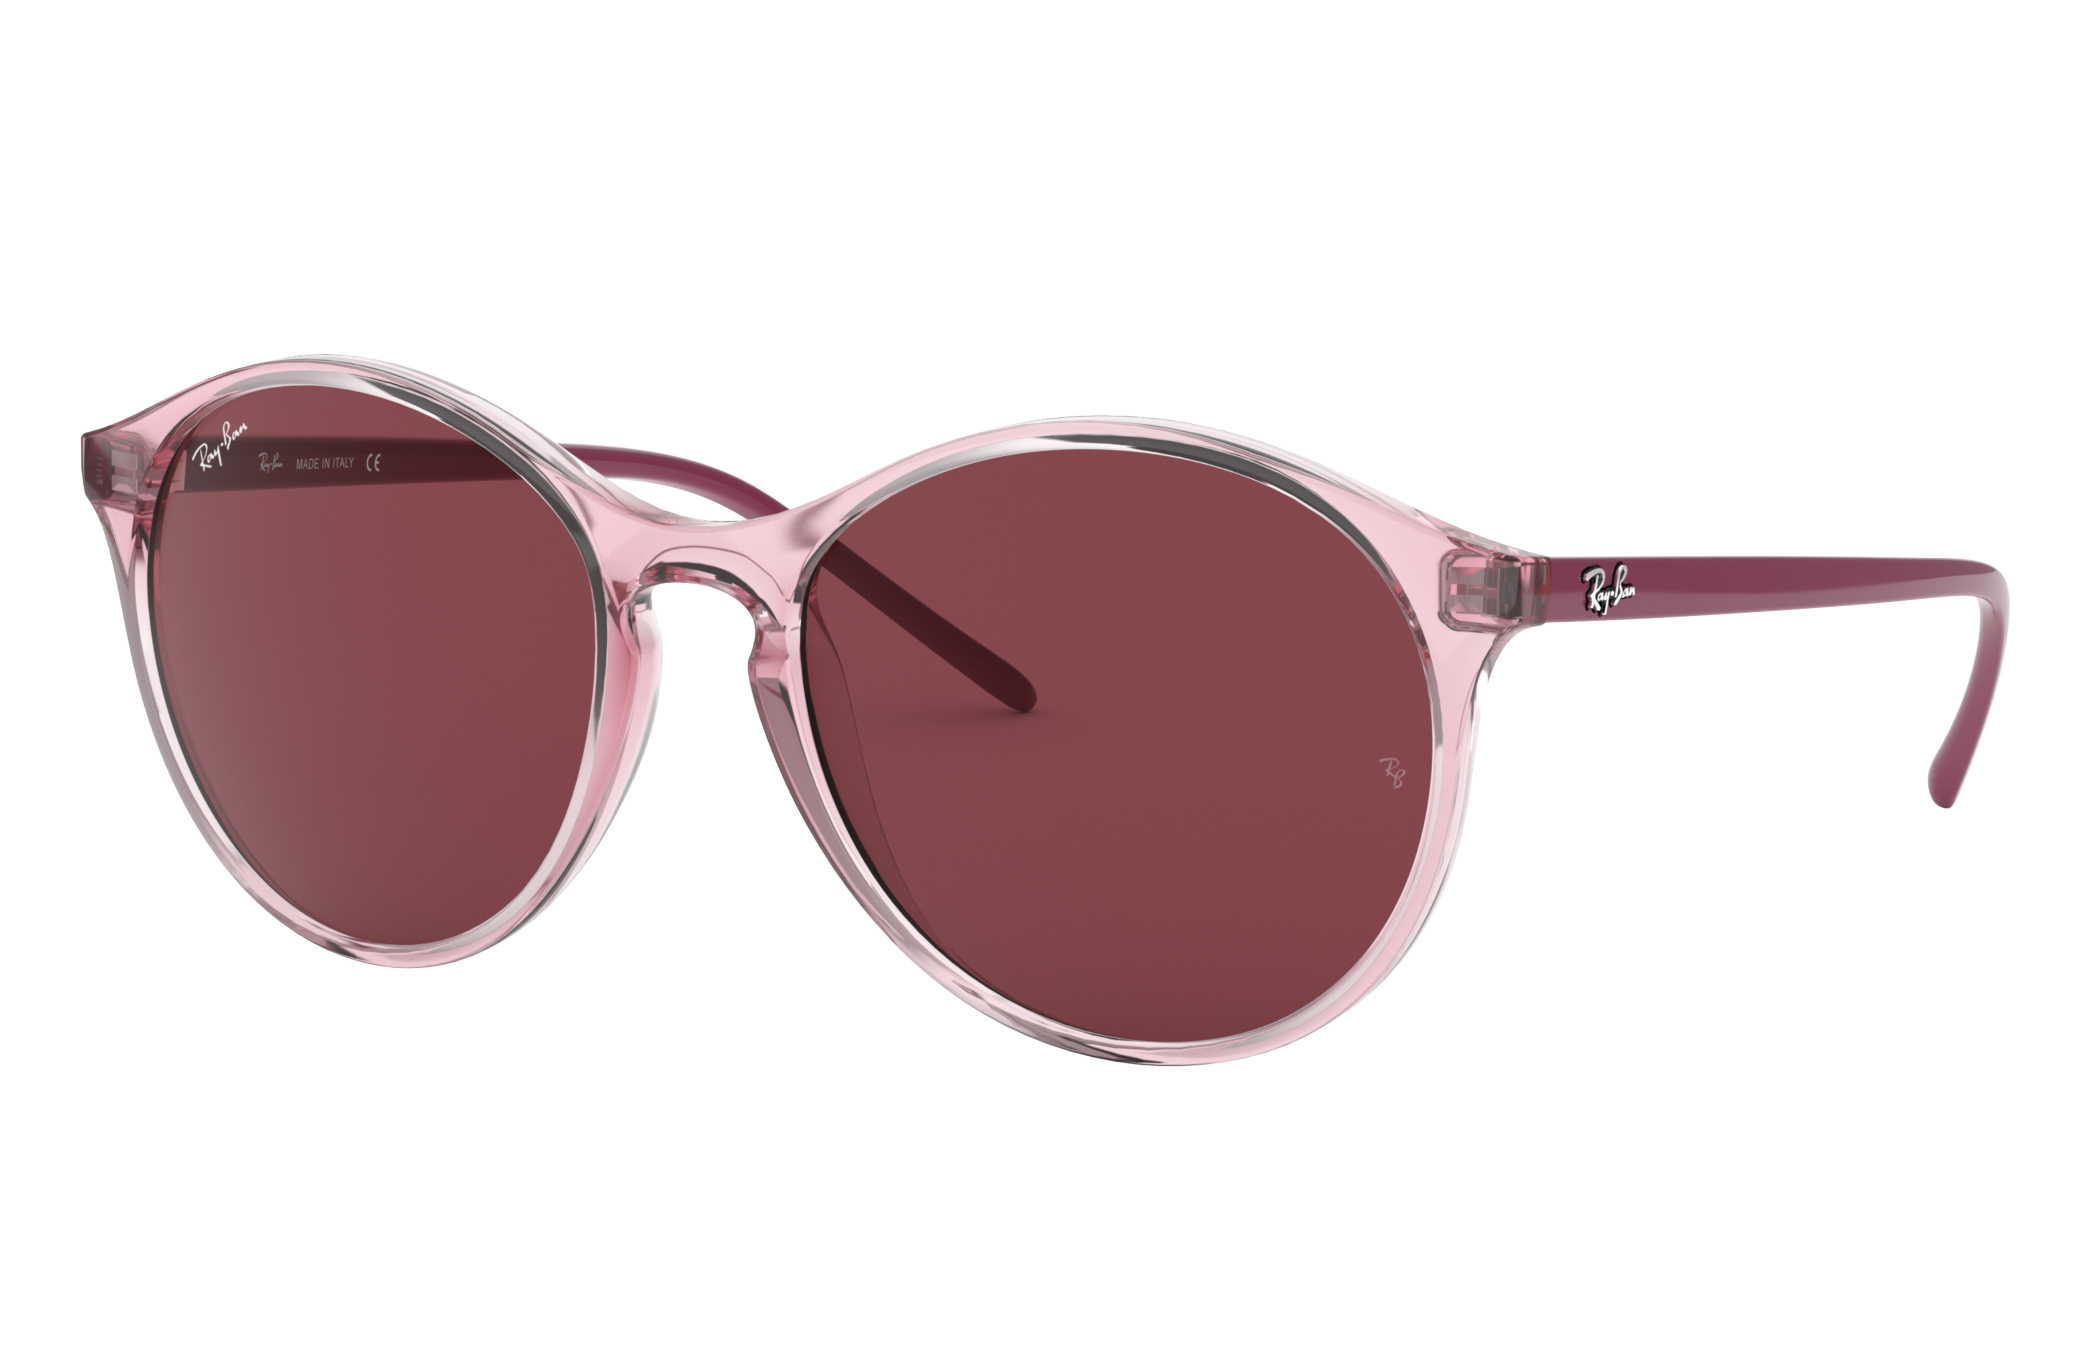 Microprocessor magneet lijn Rb4371 Sunglasses in Transparent Pink and Dark Violet | Ray-Ban®